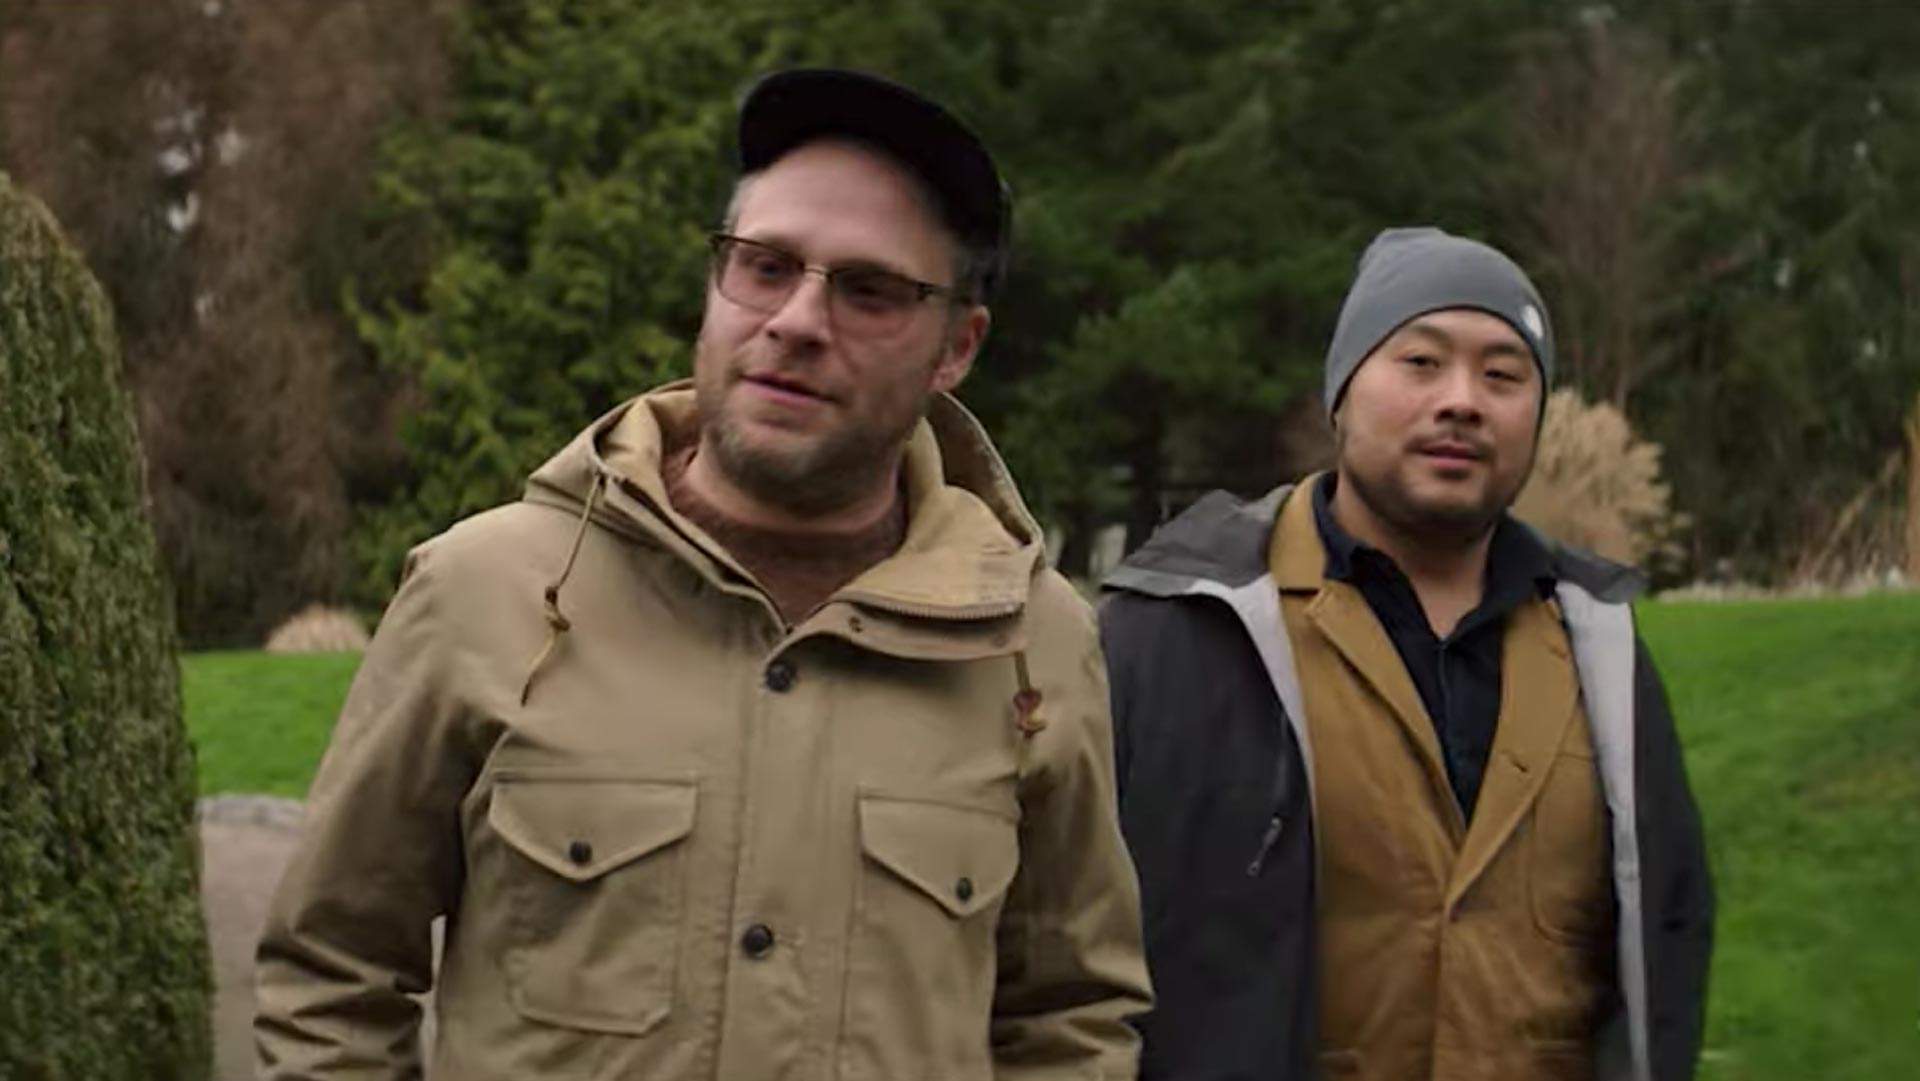 David Chang's New Netflix Show Sees Him Eating Around the World with Seth Rogen and Chrissy Teigen